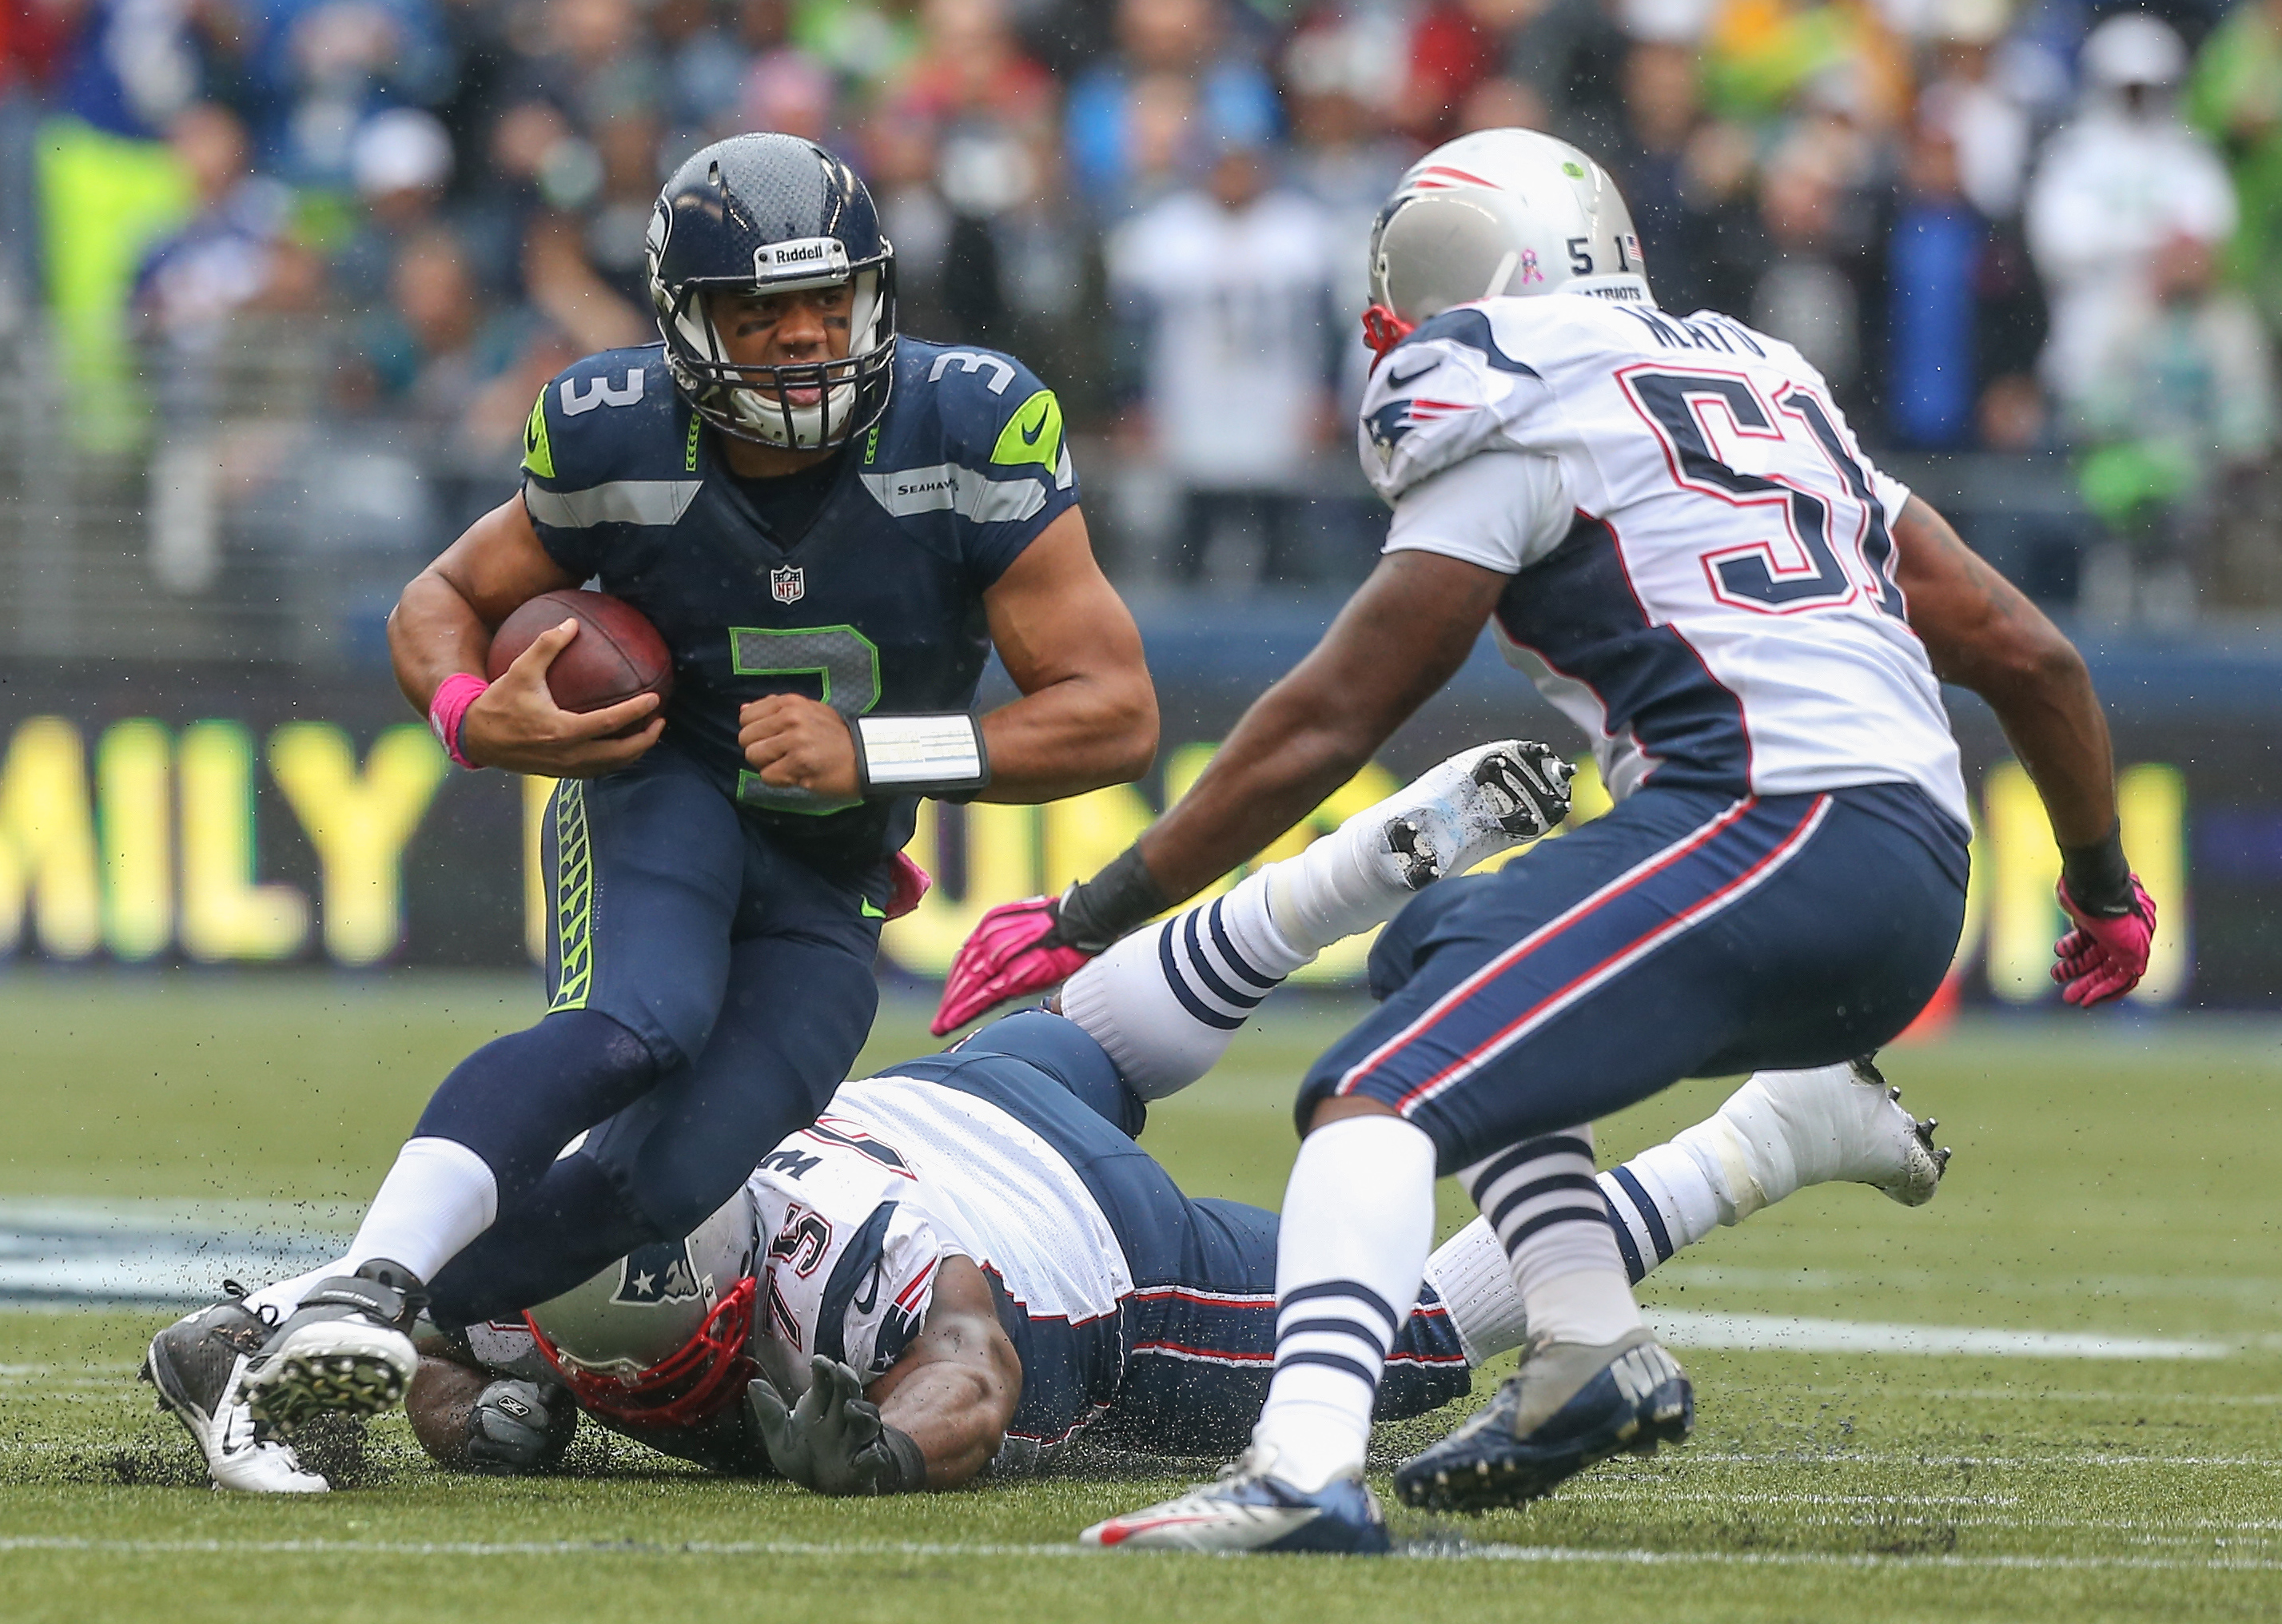 Quarterback Russell Wilson #3 of the Seattle Seahawks rushes against defensive tackle Vince Wilfork #75, and outside linebacker Jerod Mayo #51 of the New England Patriots at CenturyLink Field on October 14, 2012 in Seattle, Washington. (Otto Greule Jr&mdash;Getty Images)